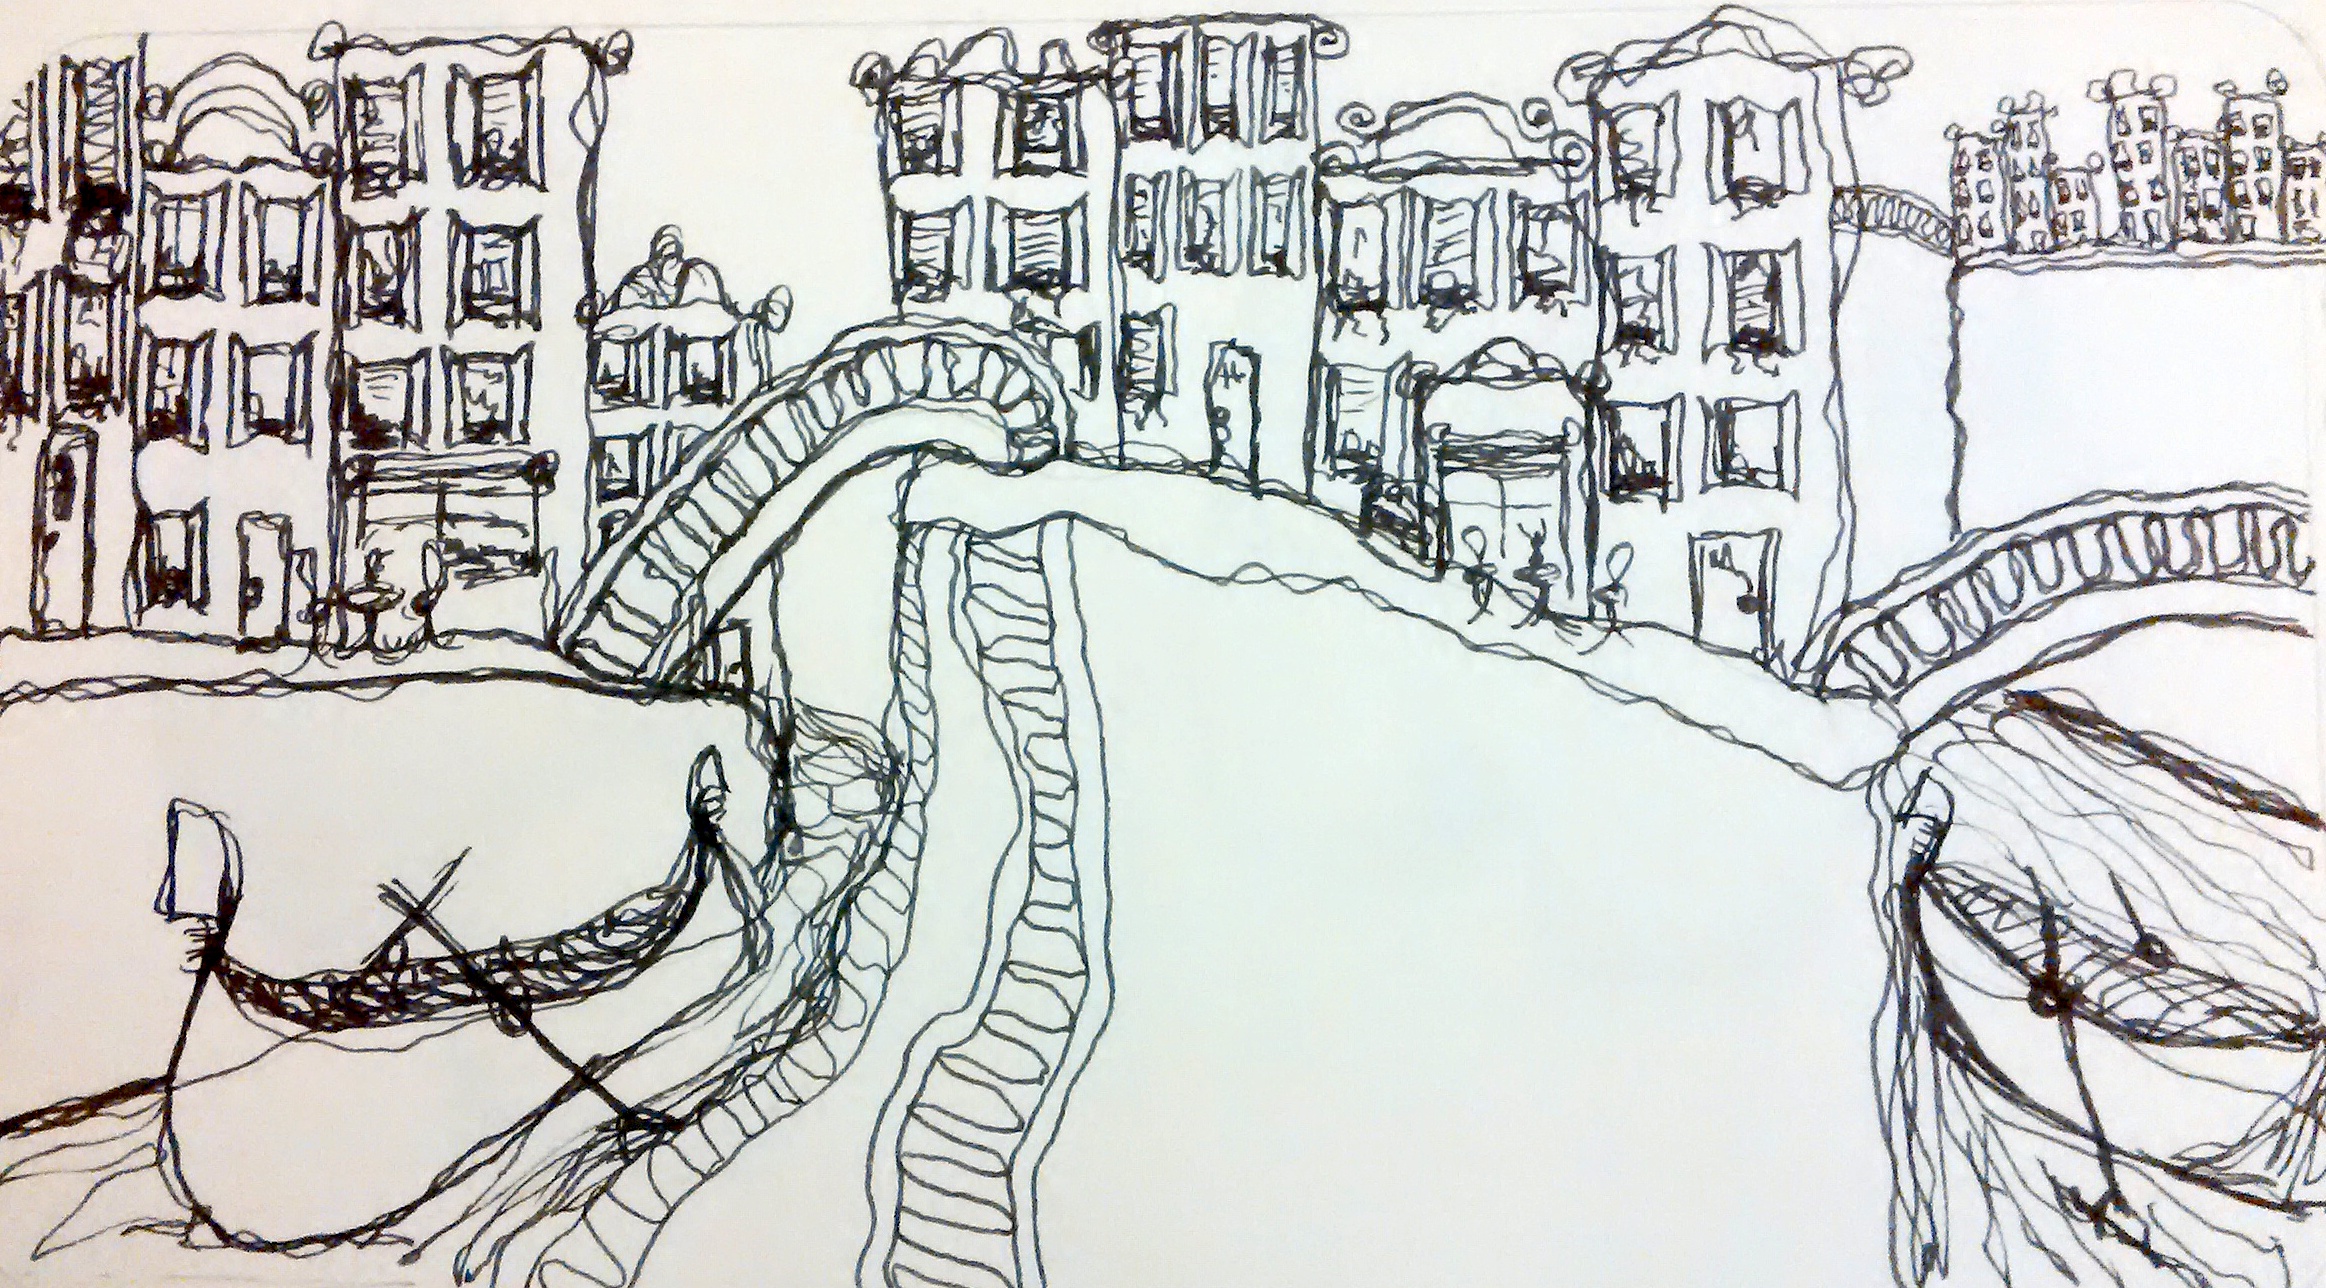 A trip to Venice. Through a doodle. Minus the wine